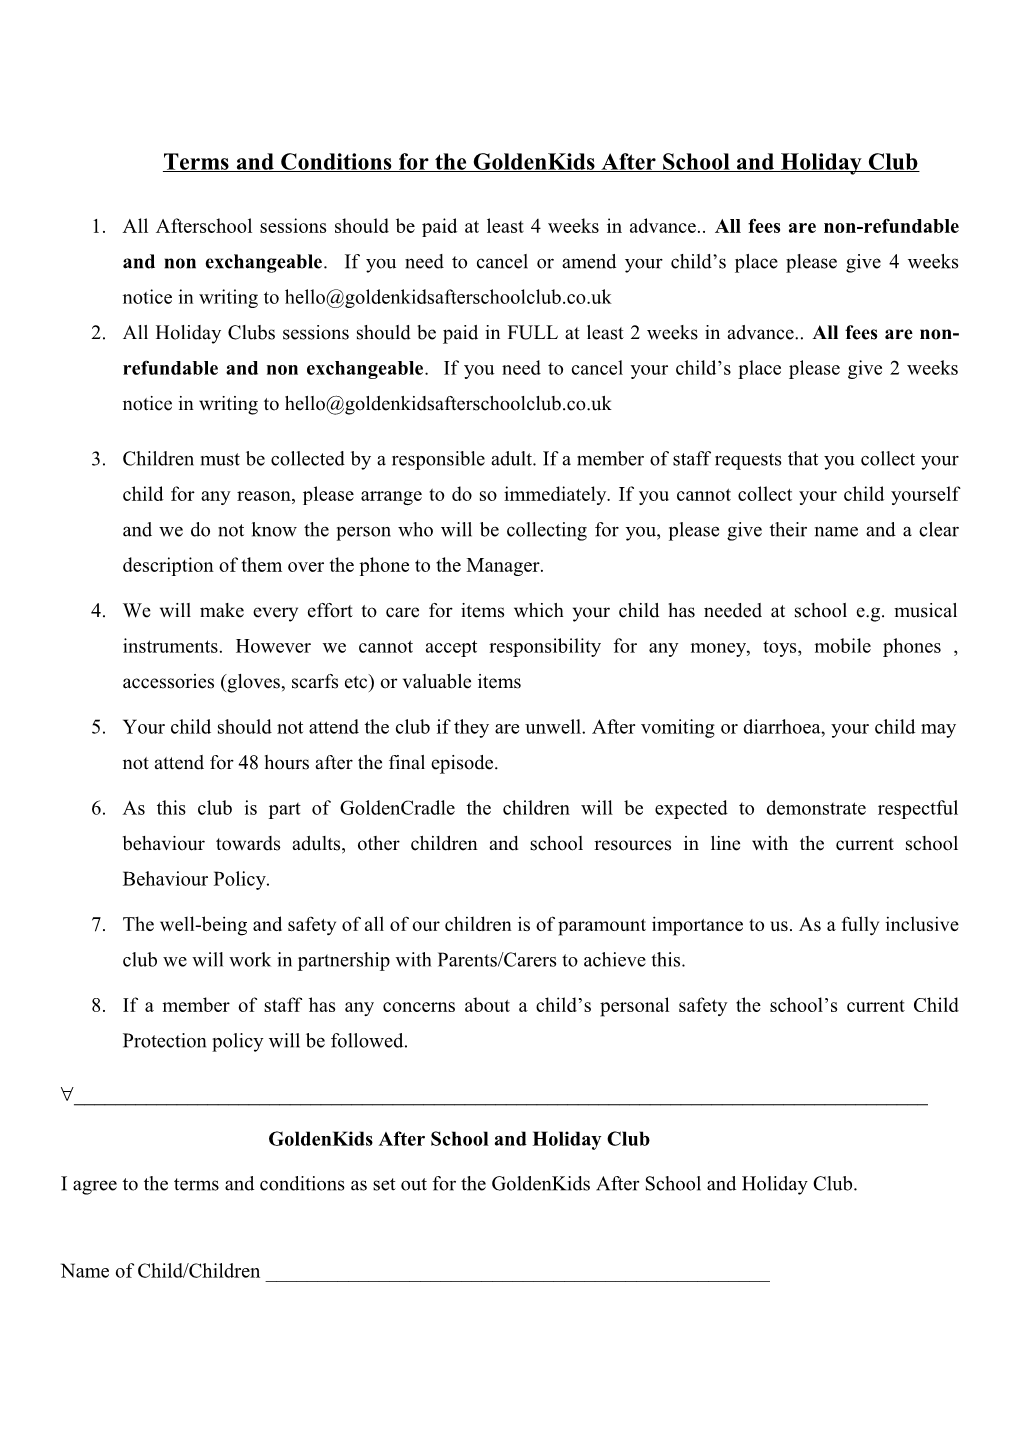 Terms and Conditions for the Goldenkids After School and Holiday Club